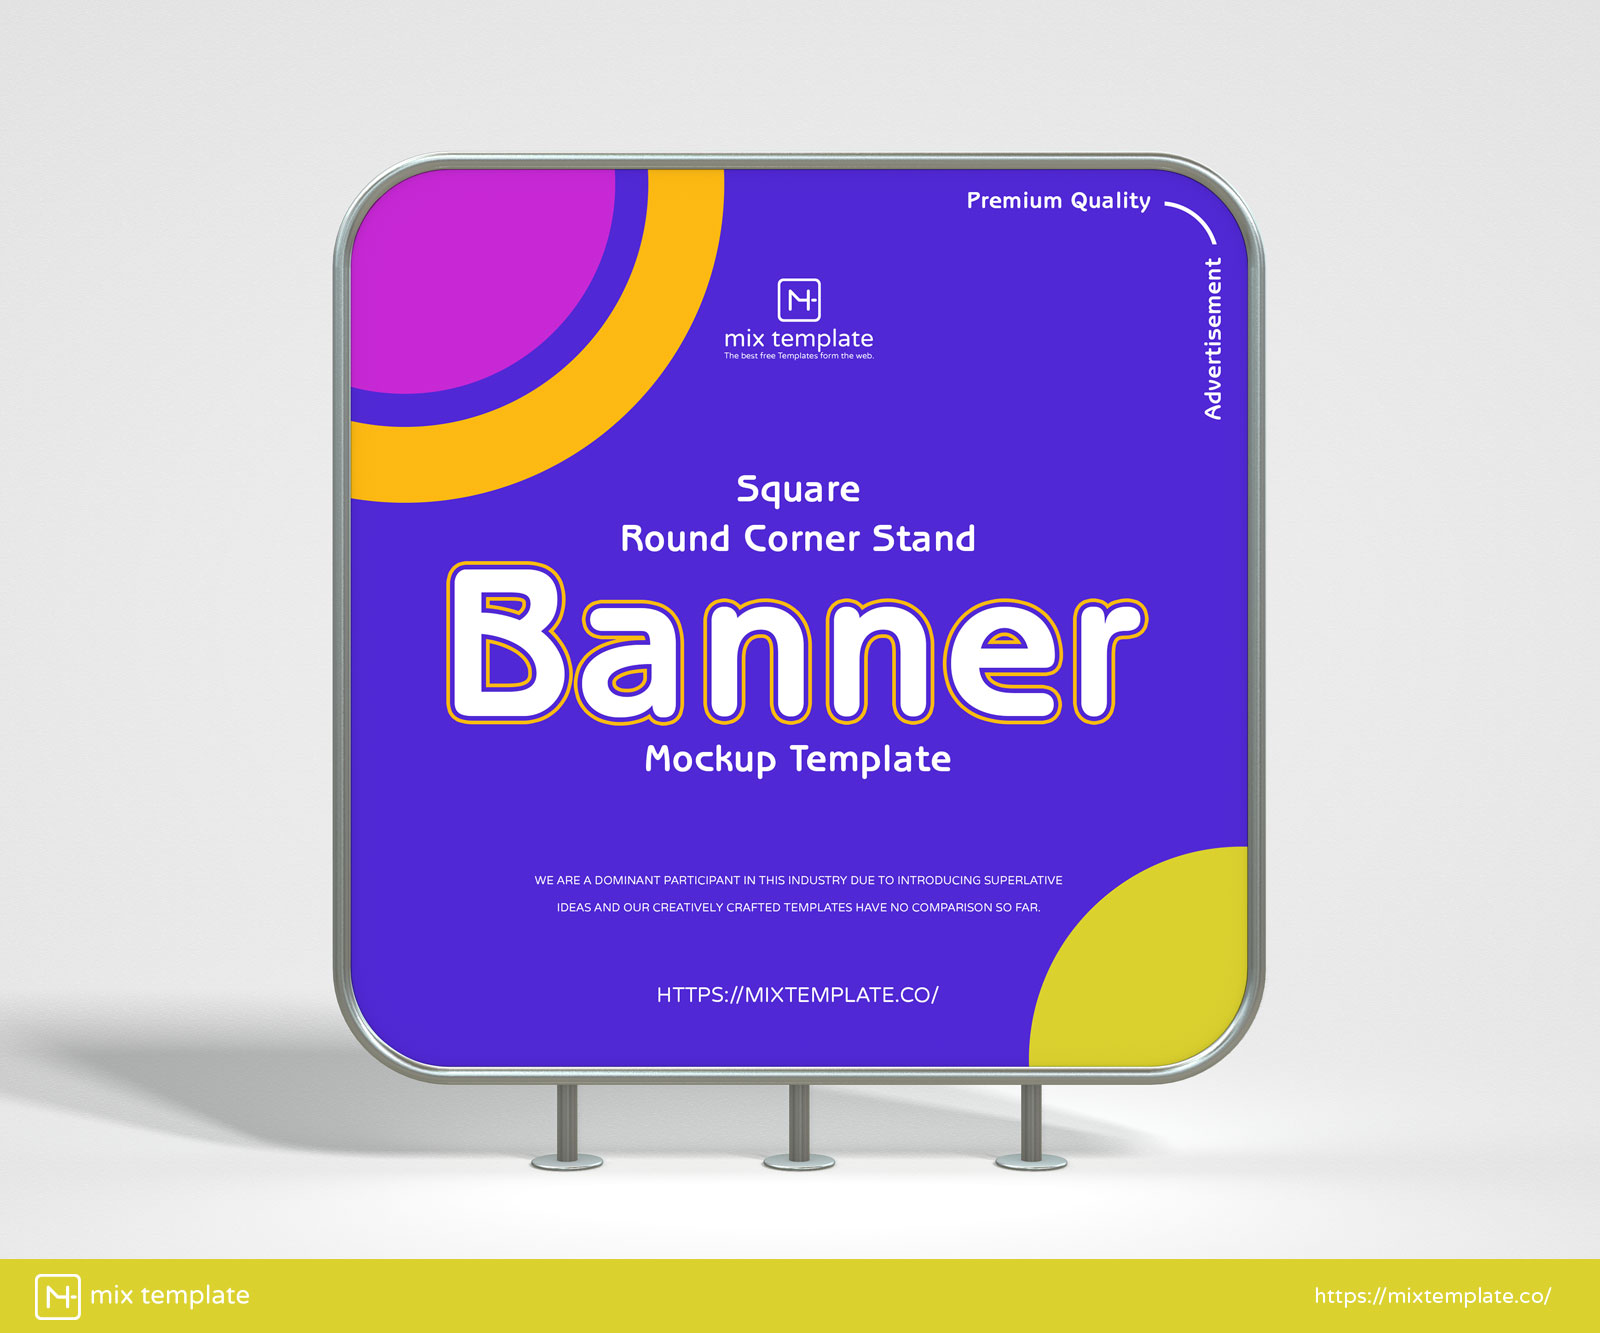 Free-Square-Round-Corner-Stand-Banner-Mockup-Template-38